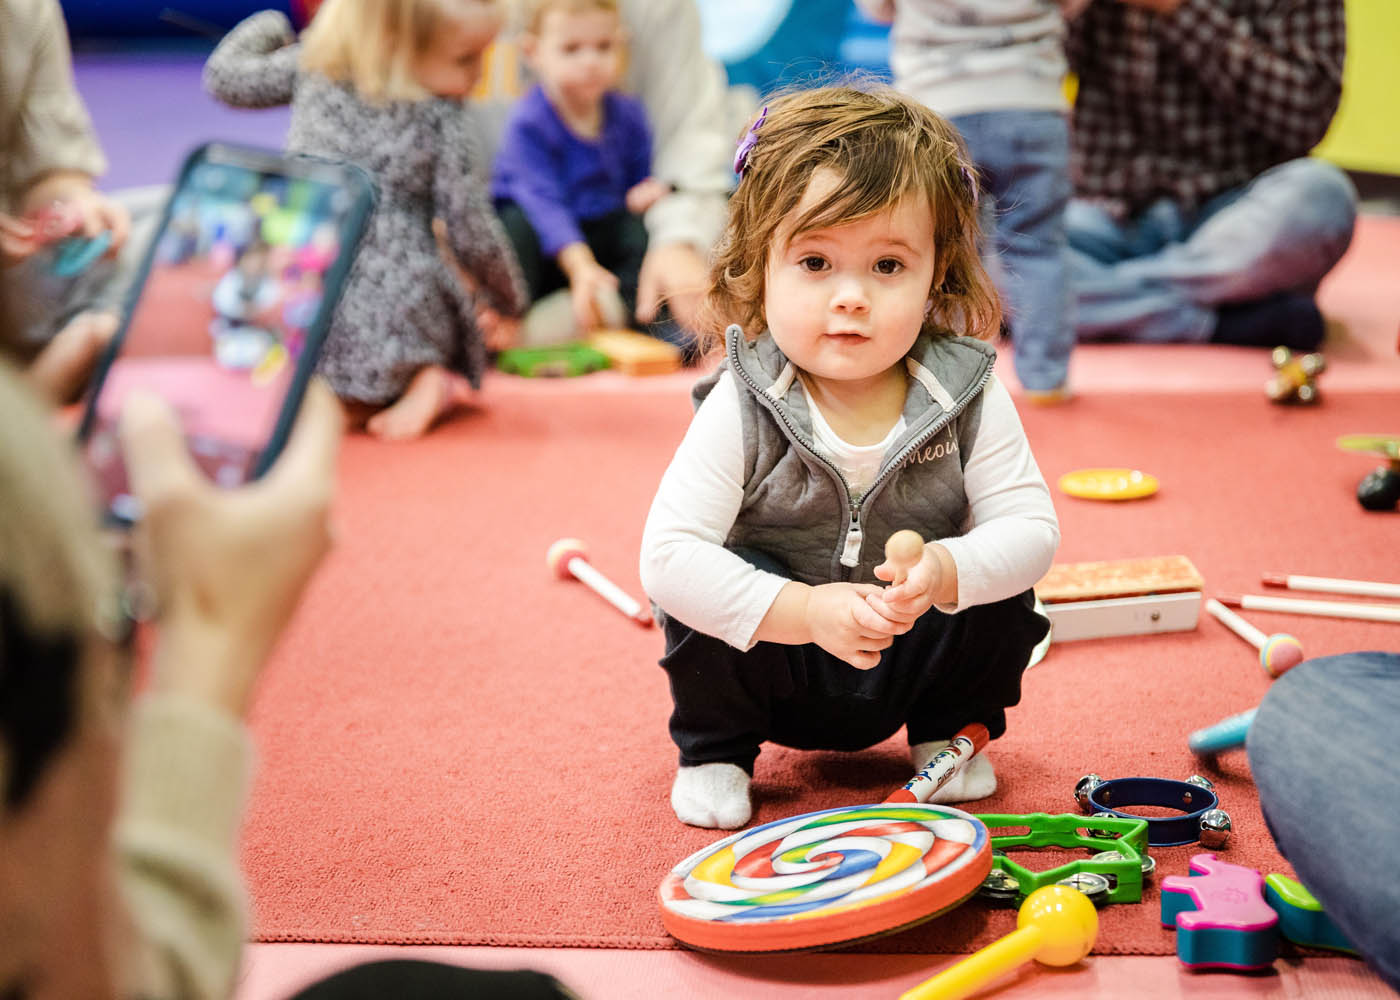 An adorable girl playing with musical instruments, an excellent activity for kids at Romp n' Roll birthday parties.